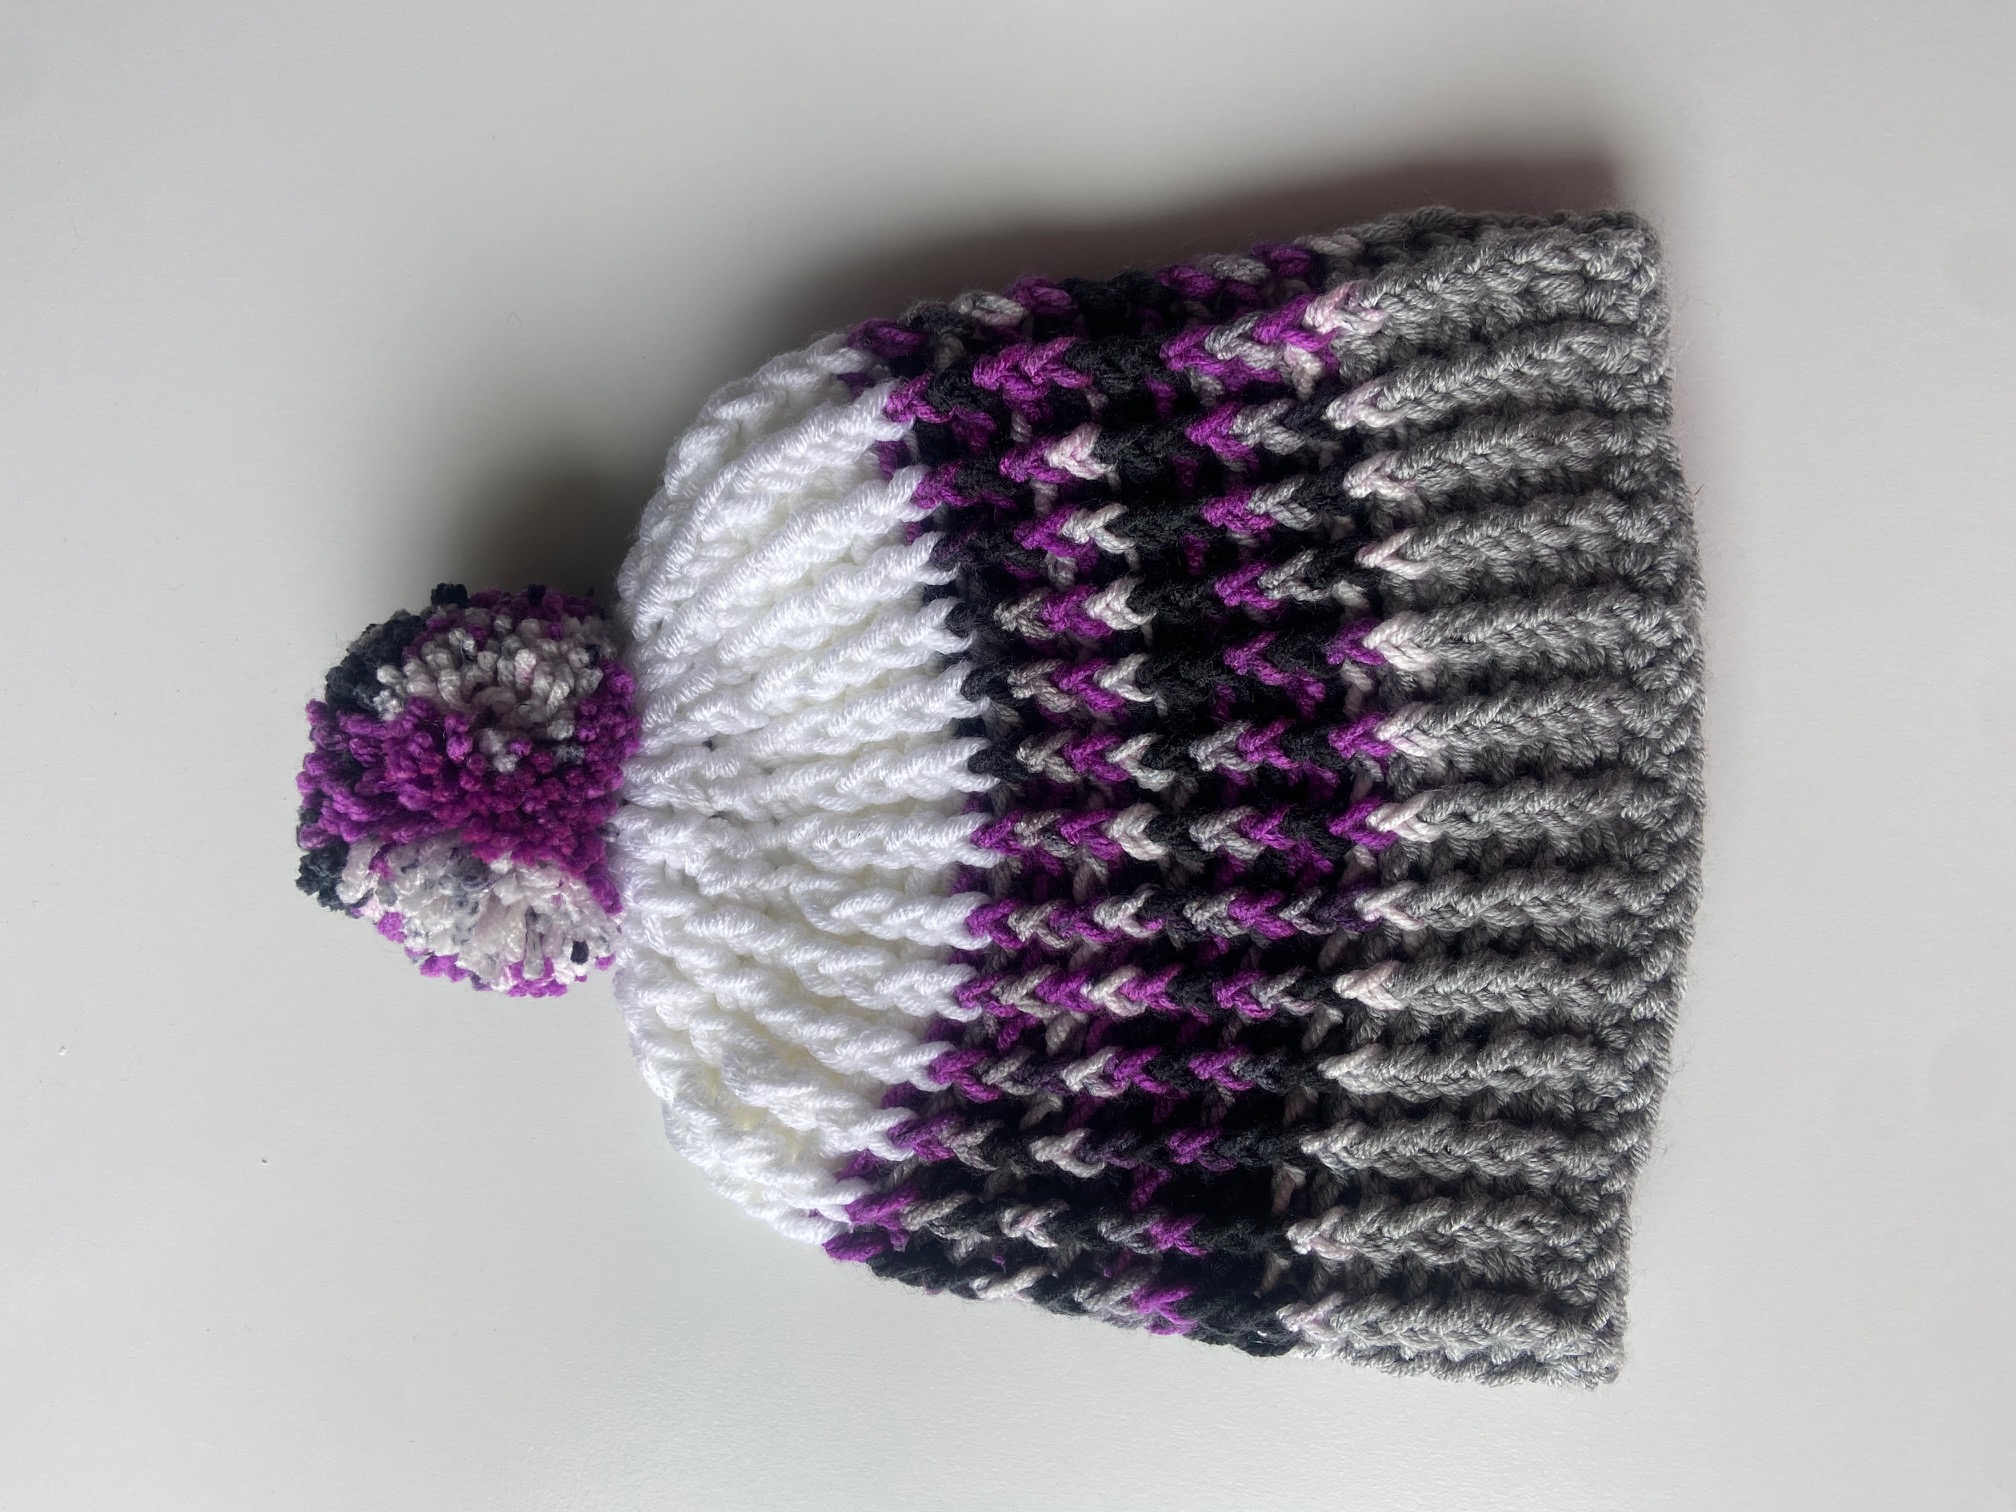 The Wild Cat Hat -- Original design -- Name inspired by the yarn